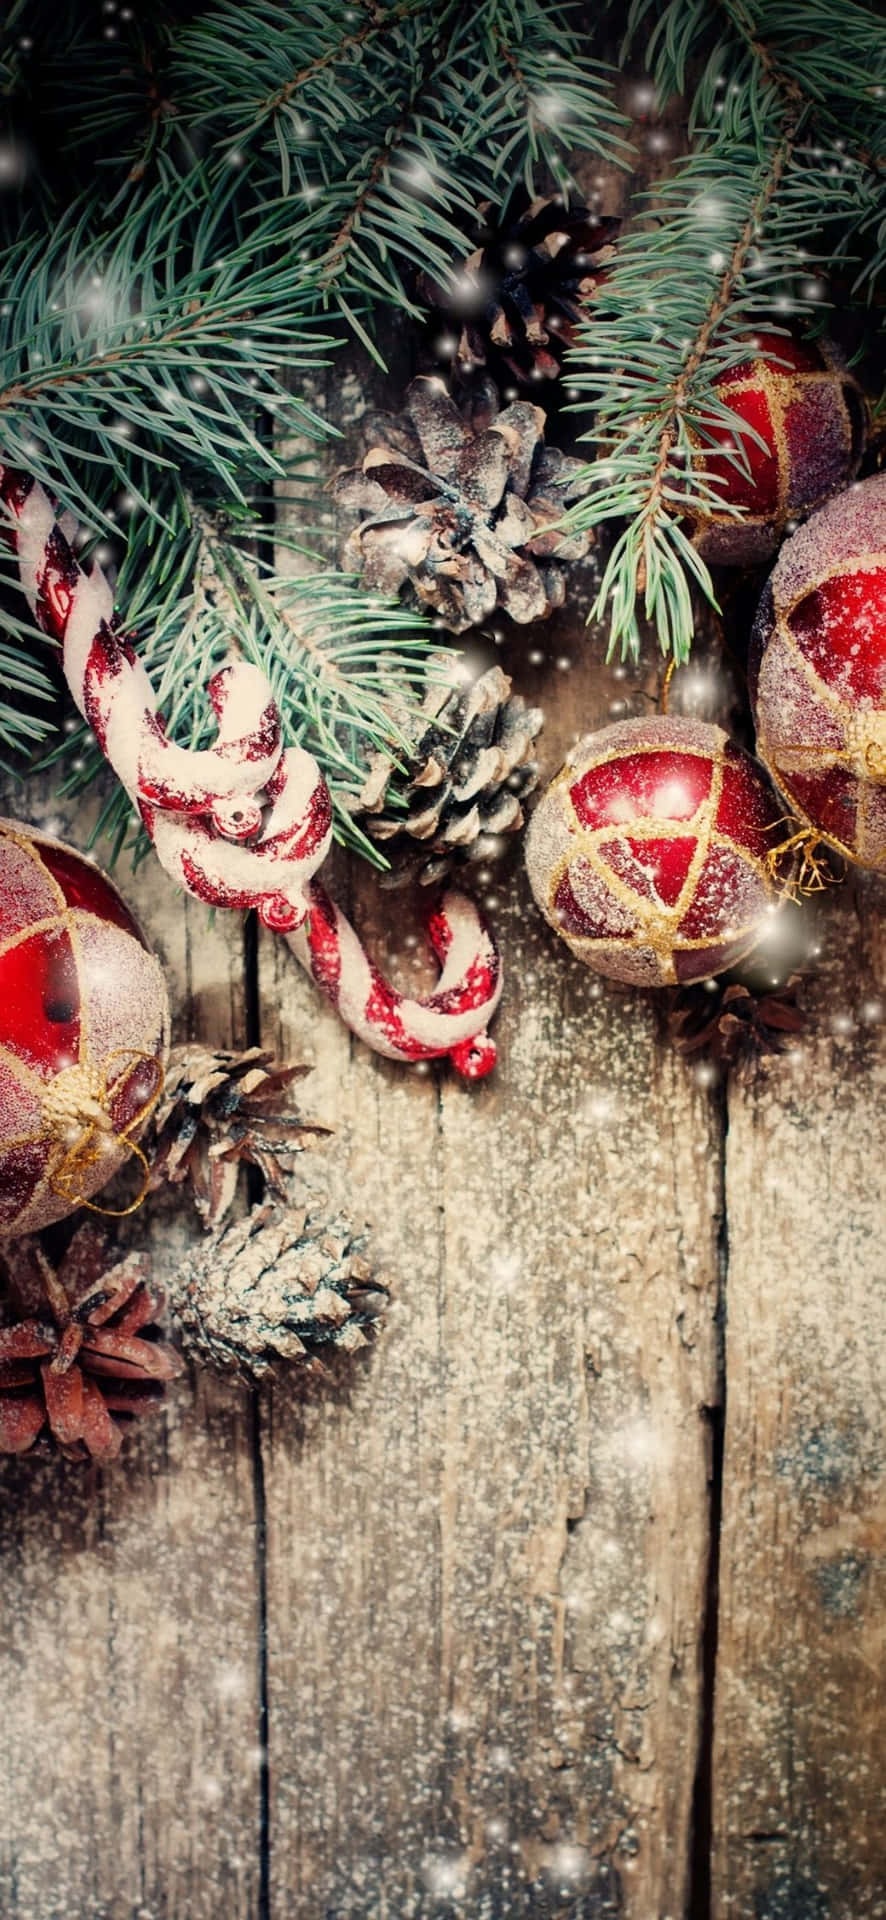 Celebrate Christmas with a new iPhone background